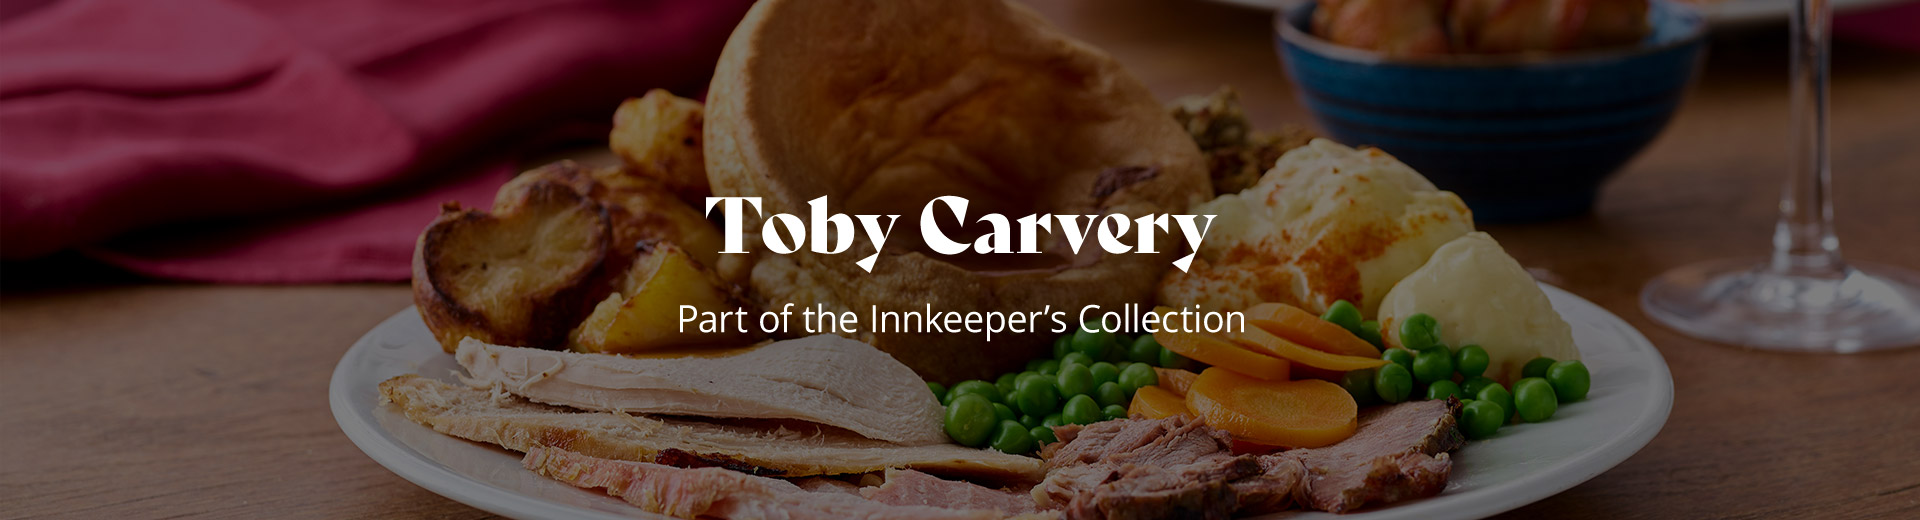 Food and Drink at Toby Carvery